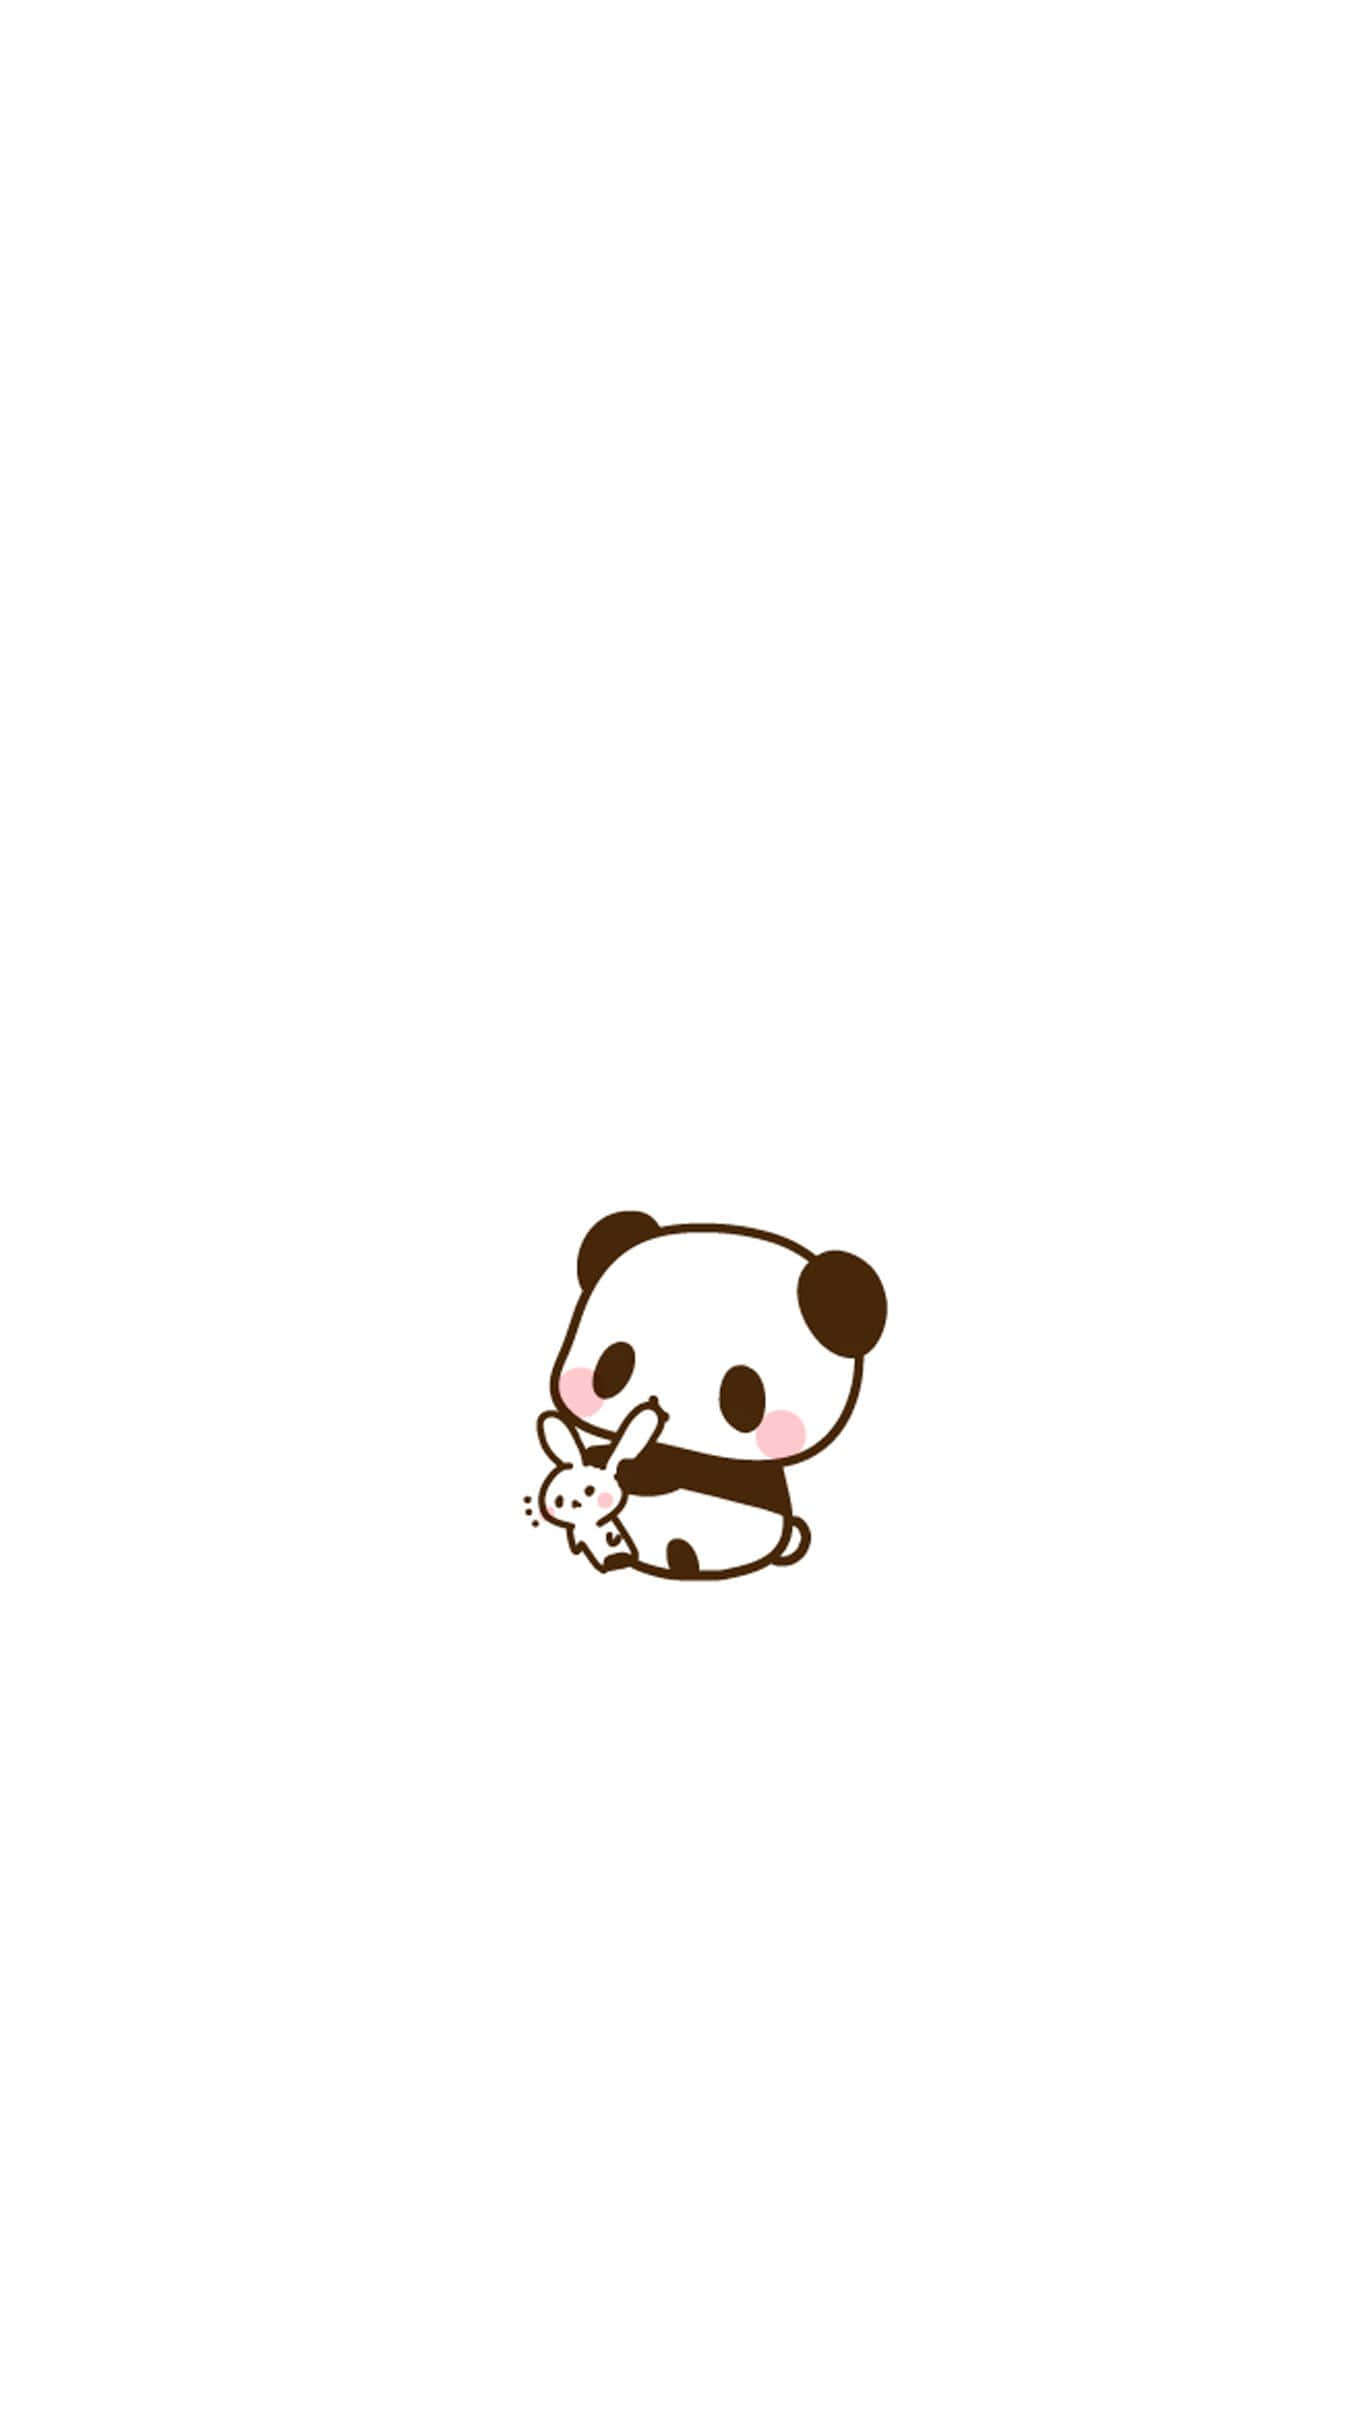 A Panda Bear Is Sitting On A White Background